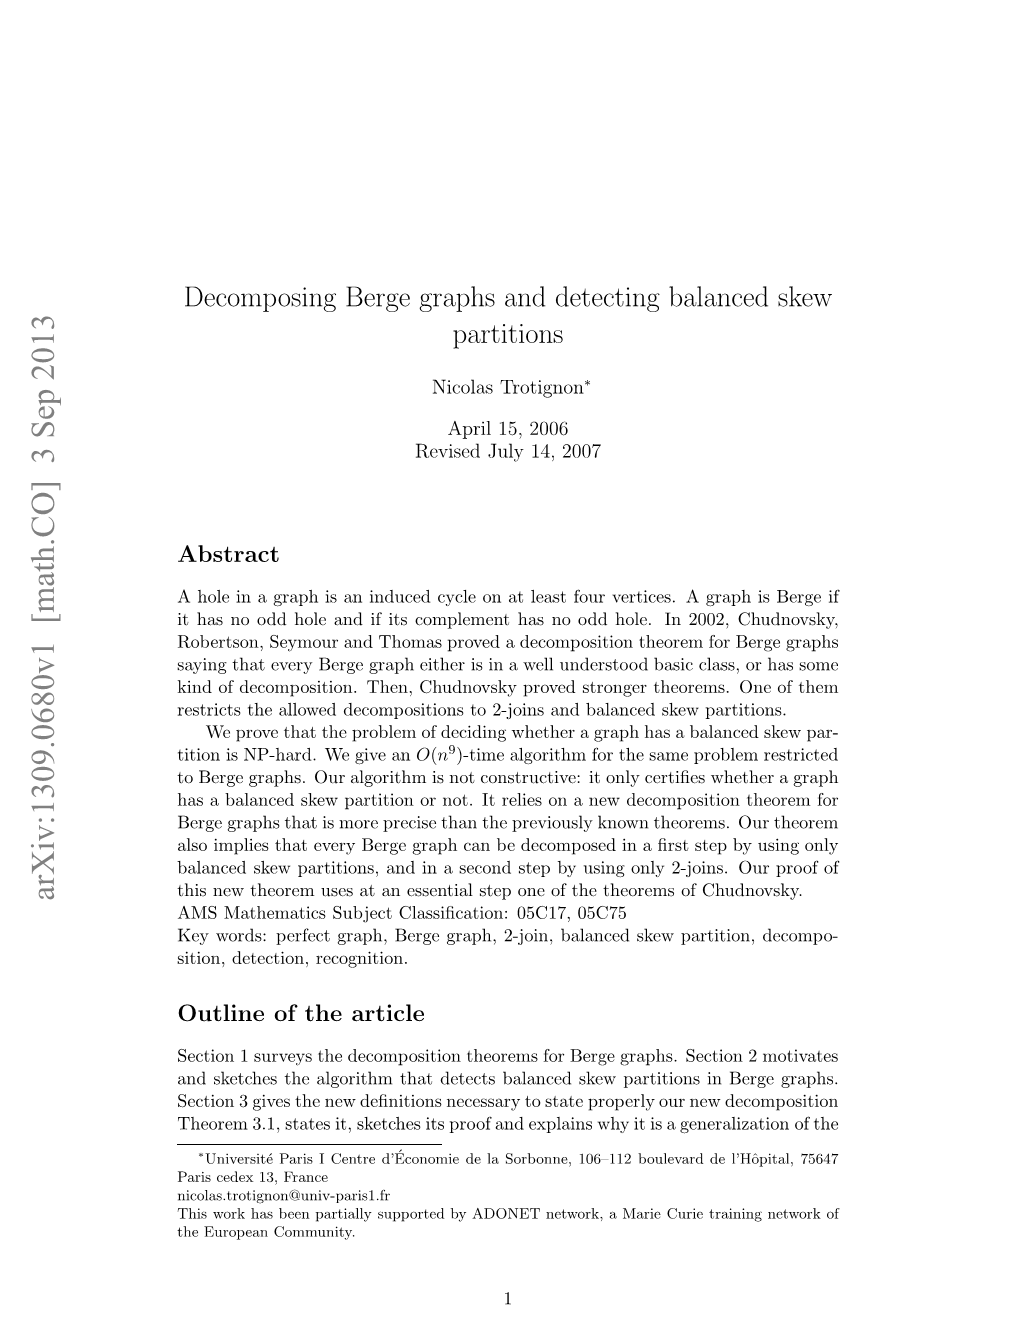 Decomposing Berge Graphs and Detecting Balanced Skew Partitions